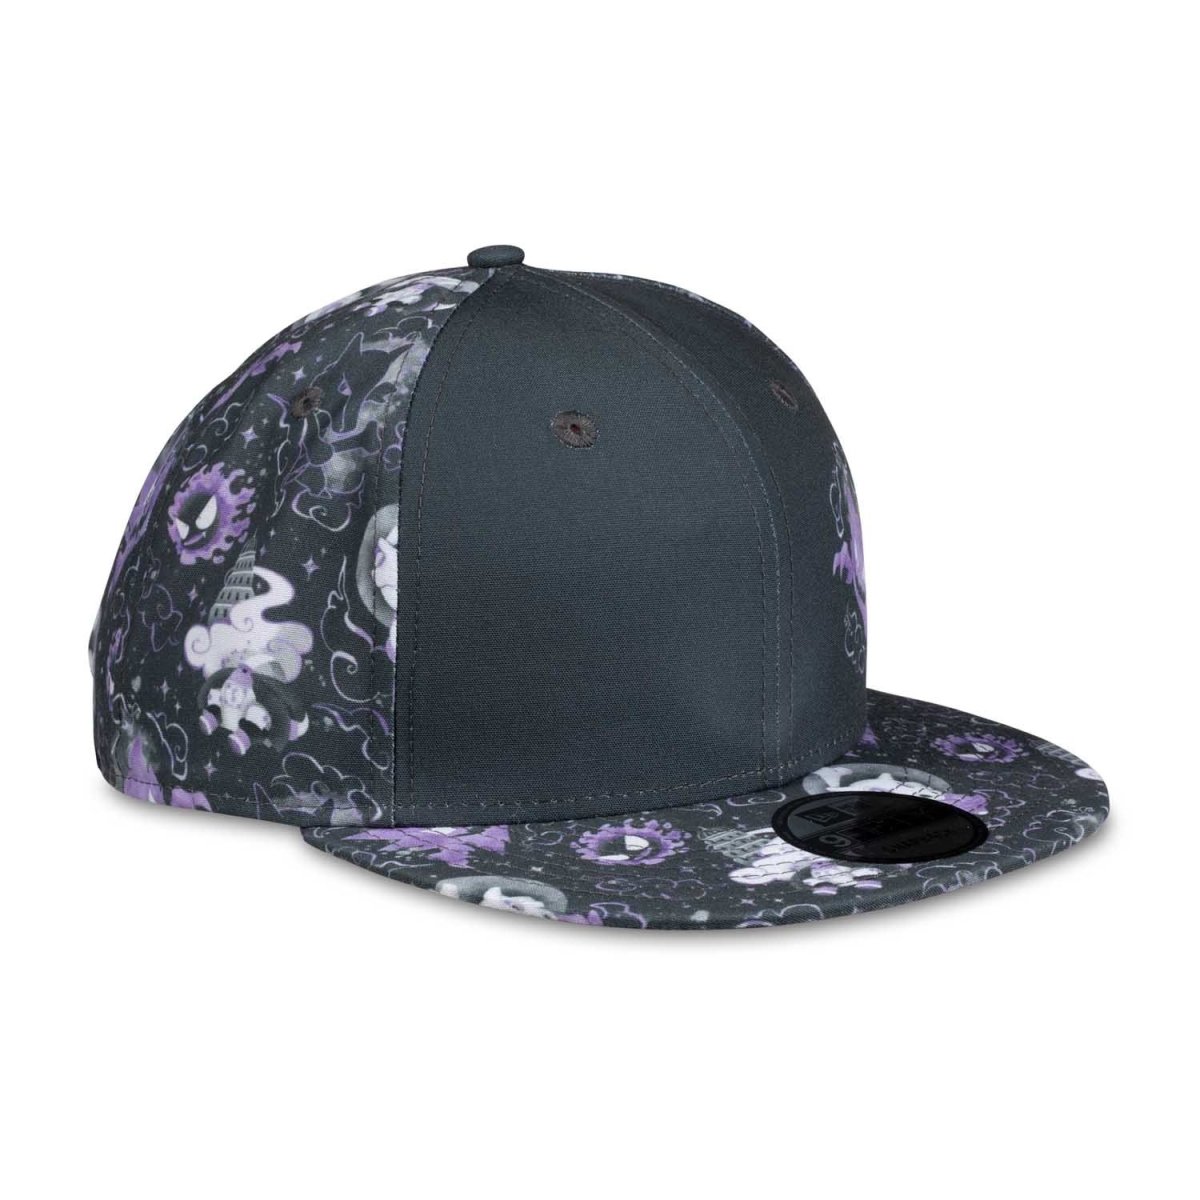 Lavender Town 9FIFTY Baseball Cap by New Era (One Size-Adult)